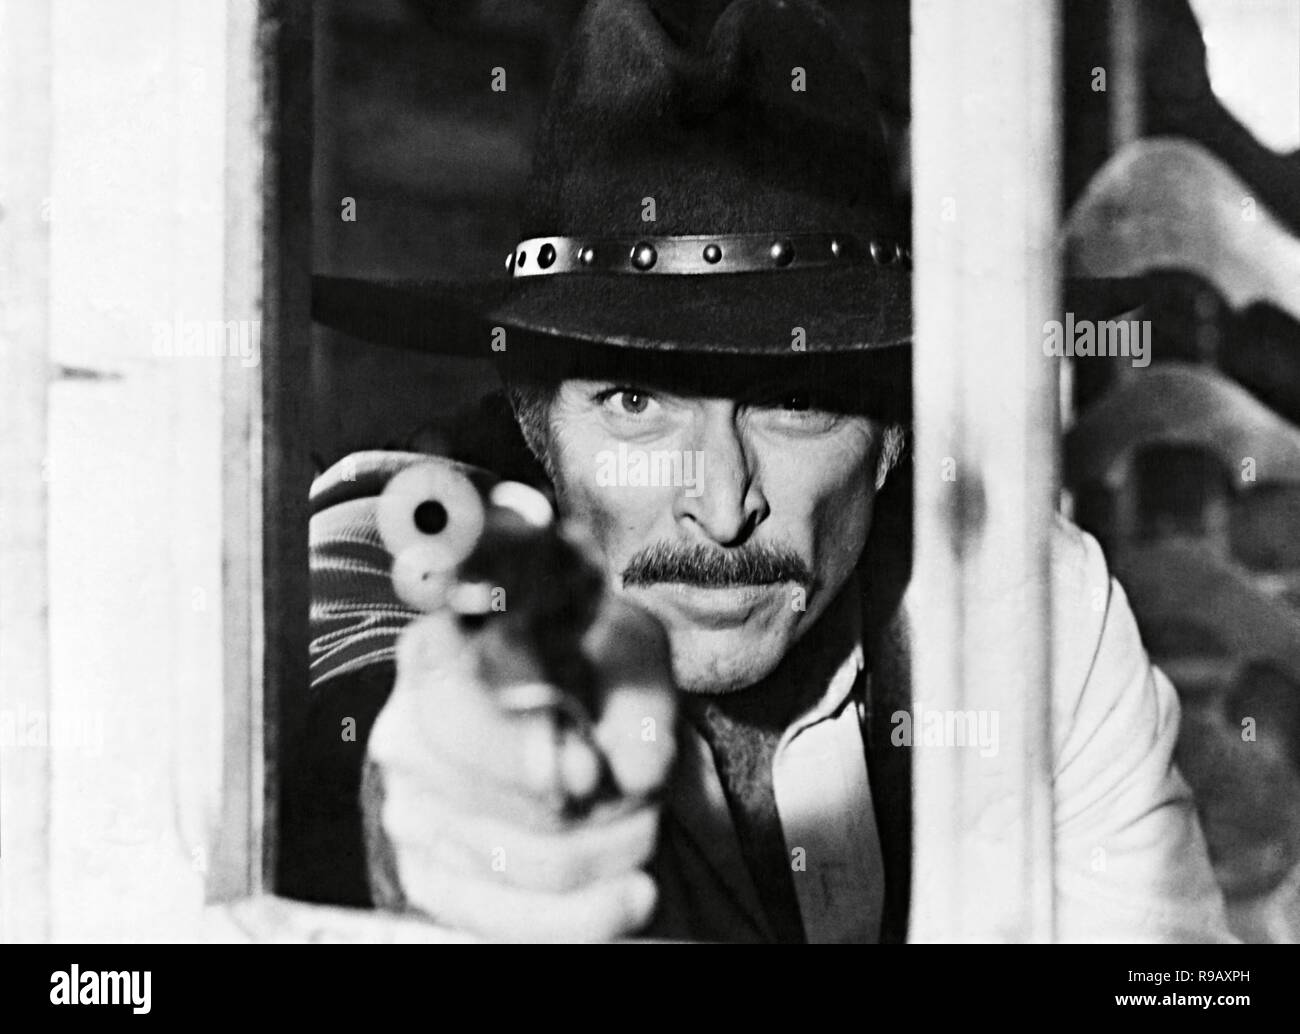 Lee Van Cleef High Resolution Stock Photography and Images - Alamy